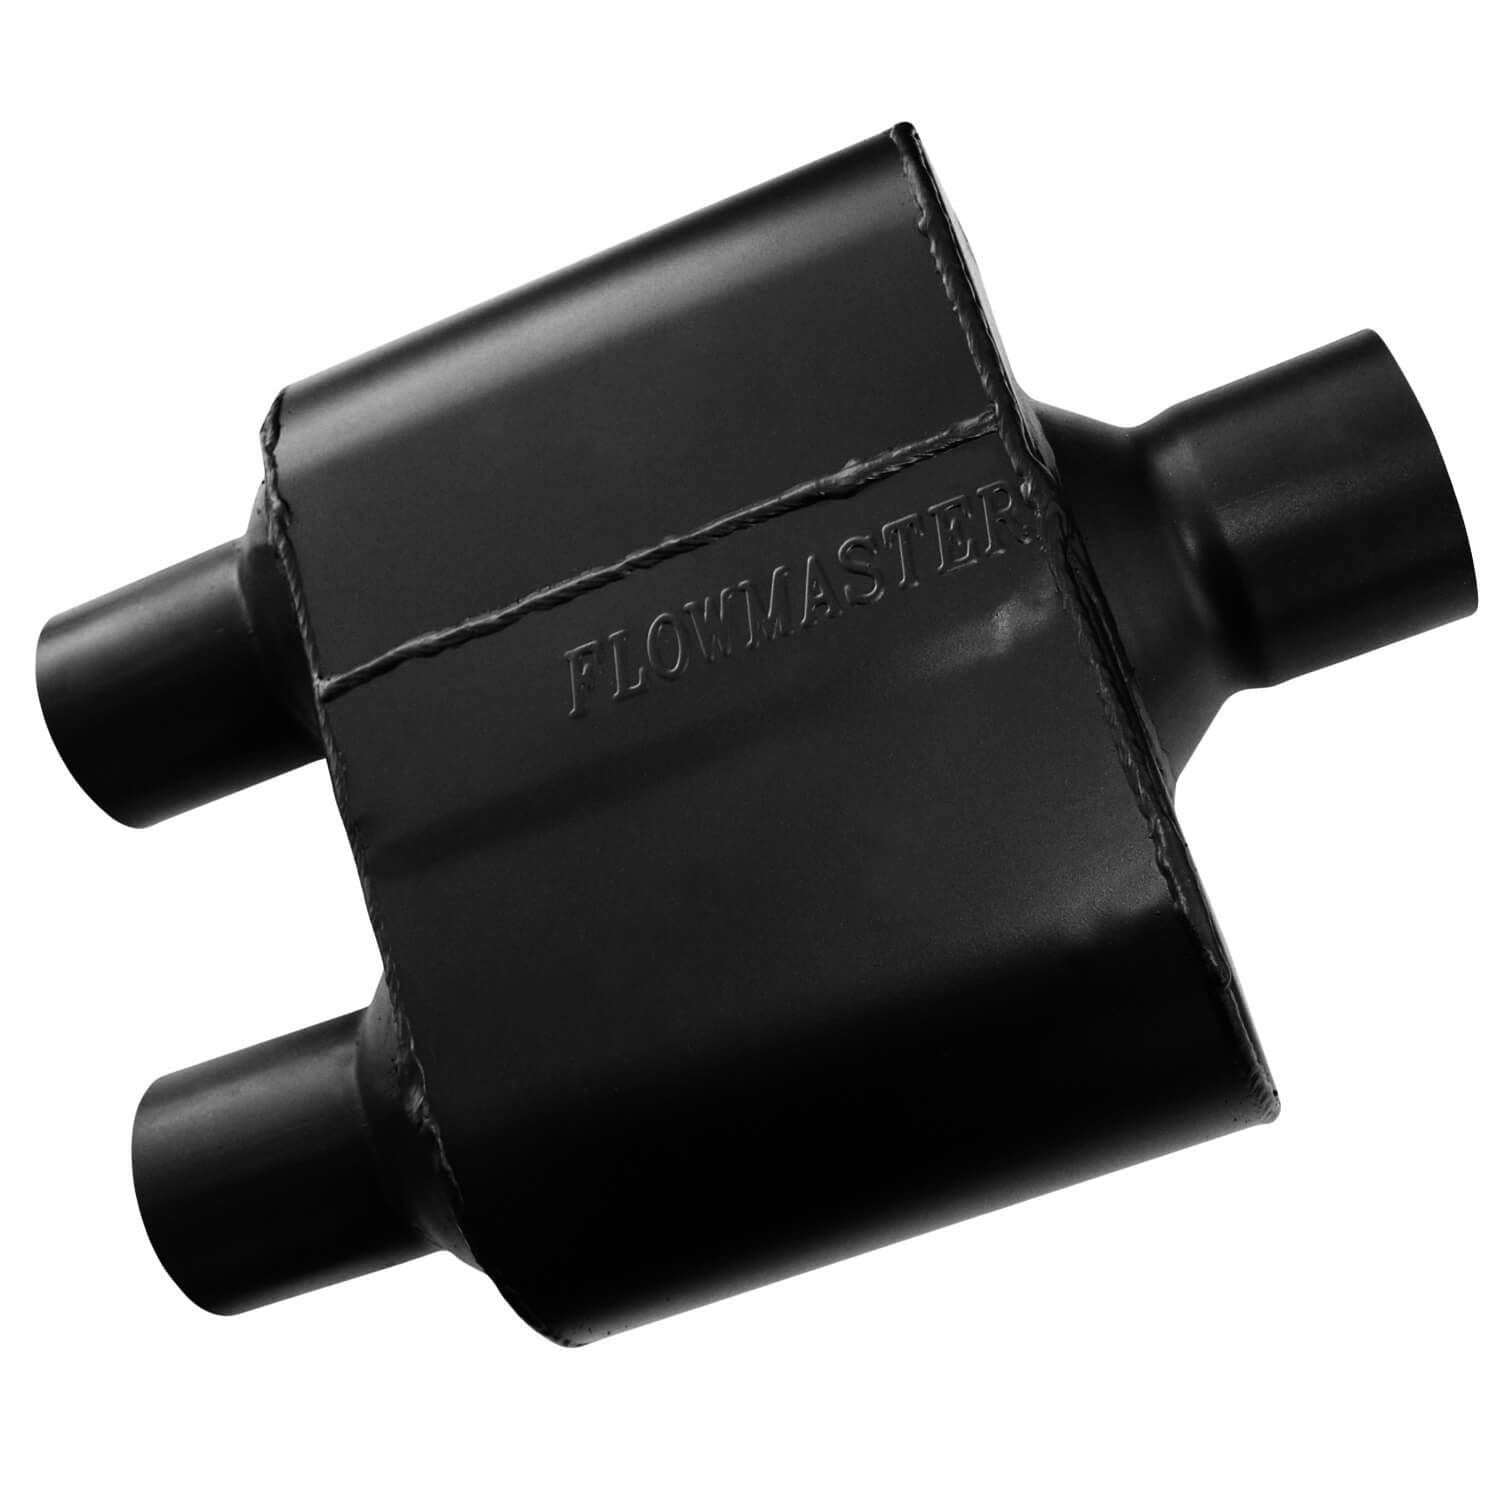 Flowmaster 8430152 - Super 10 Series Stainless Steel Chambered muffler - 3.00 Center In / 2.50 Dual Out